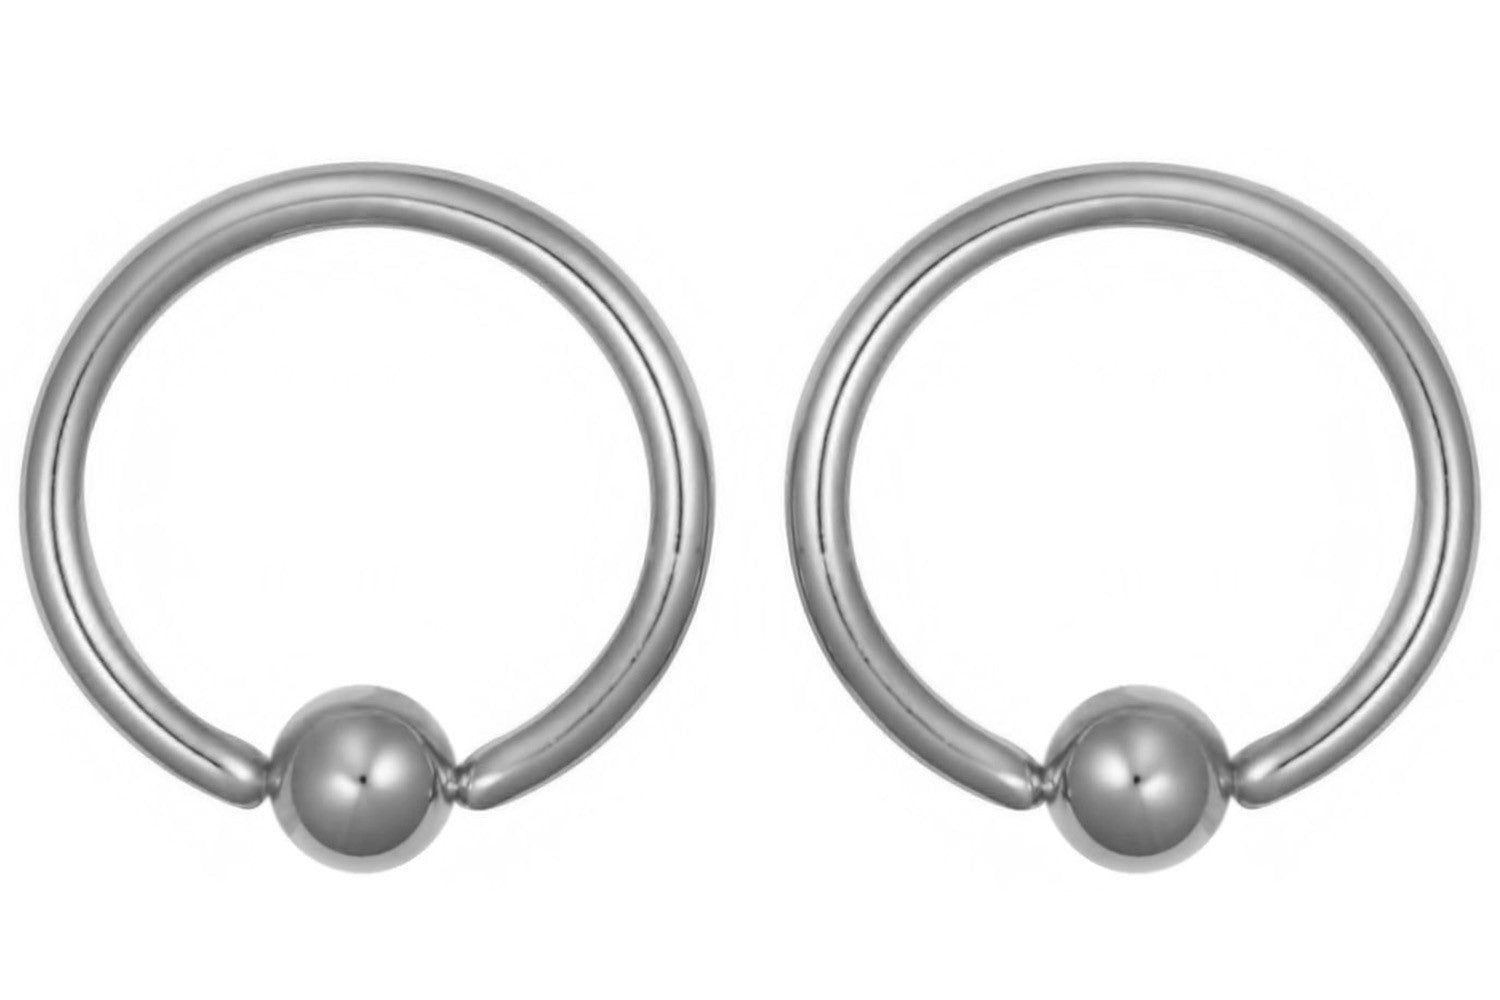 These CBR rings are made with solid Grade 23 Titanium. They are 16 gauge and 11 mm in diameter with 4 mm balls.